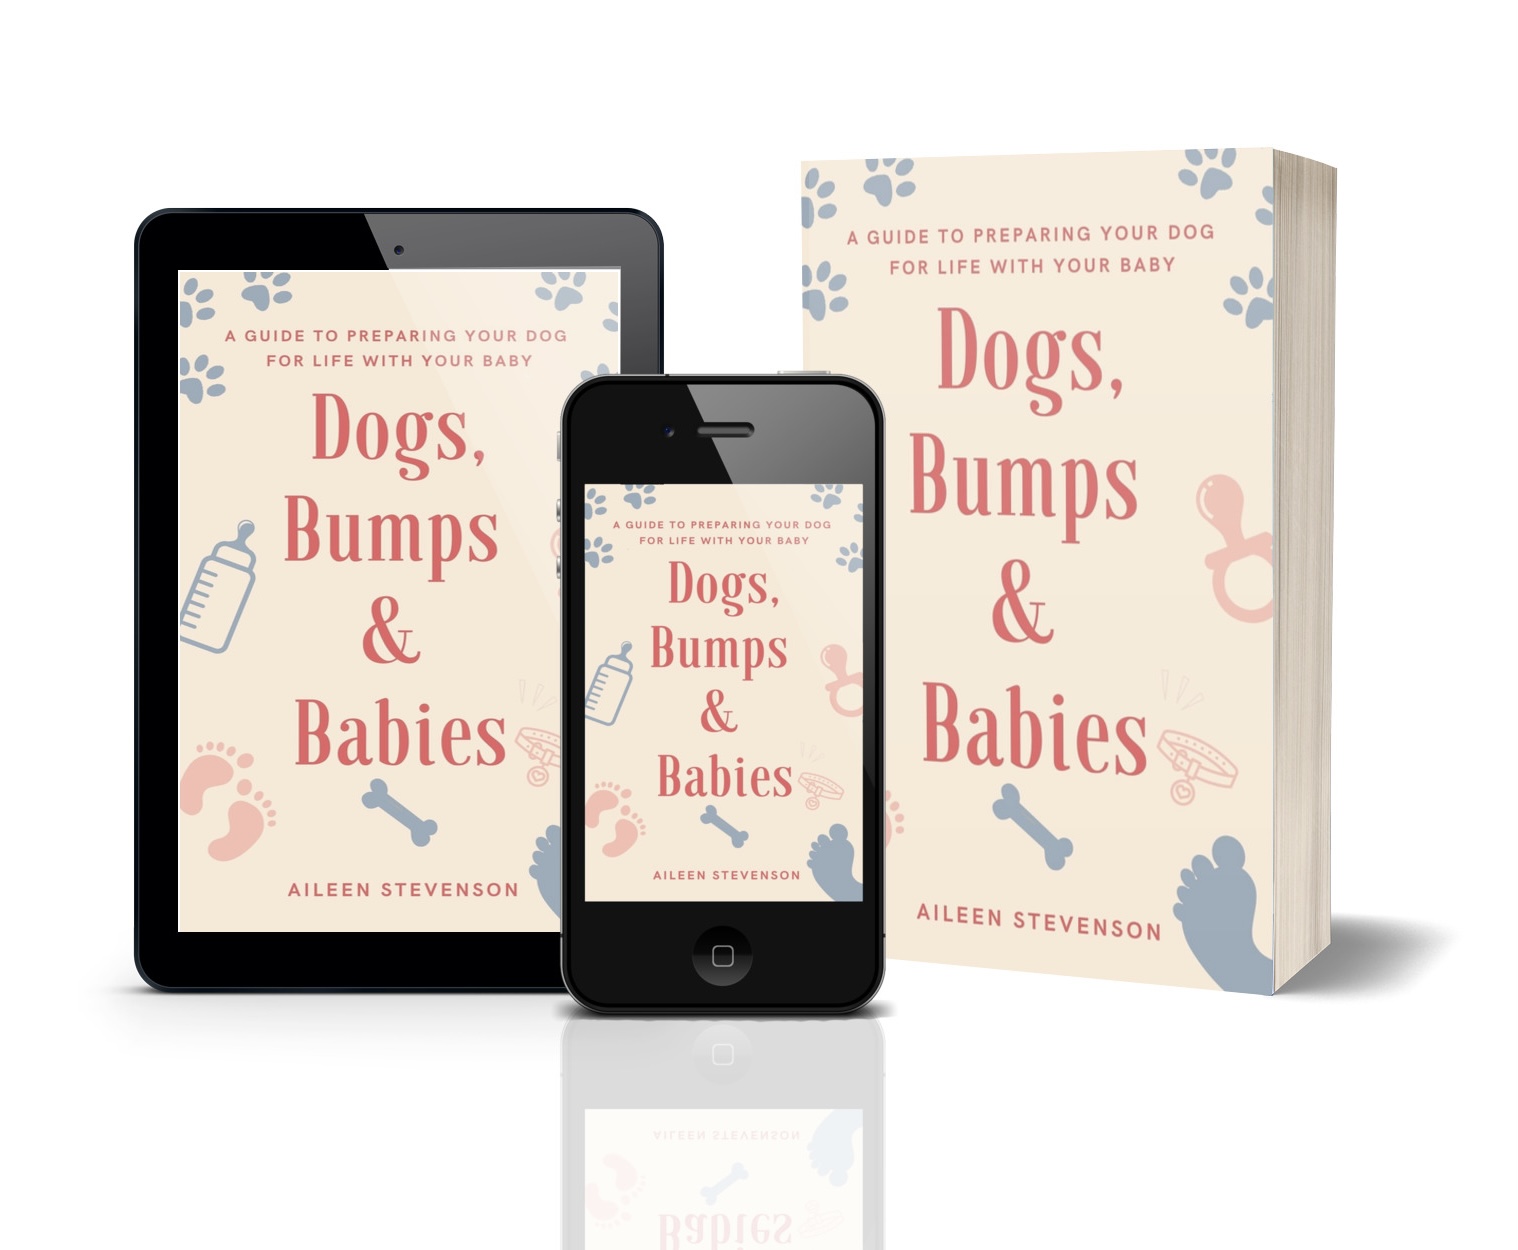 Dogs, Bumps & Babies: Preparing Your Dog For Life With Your Baby